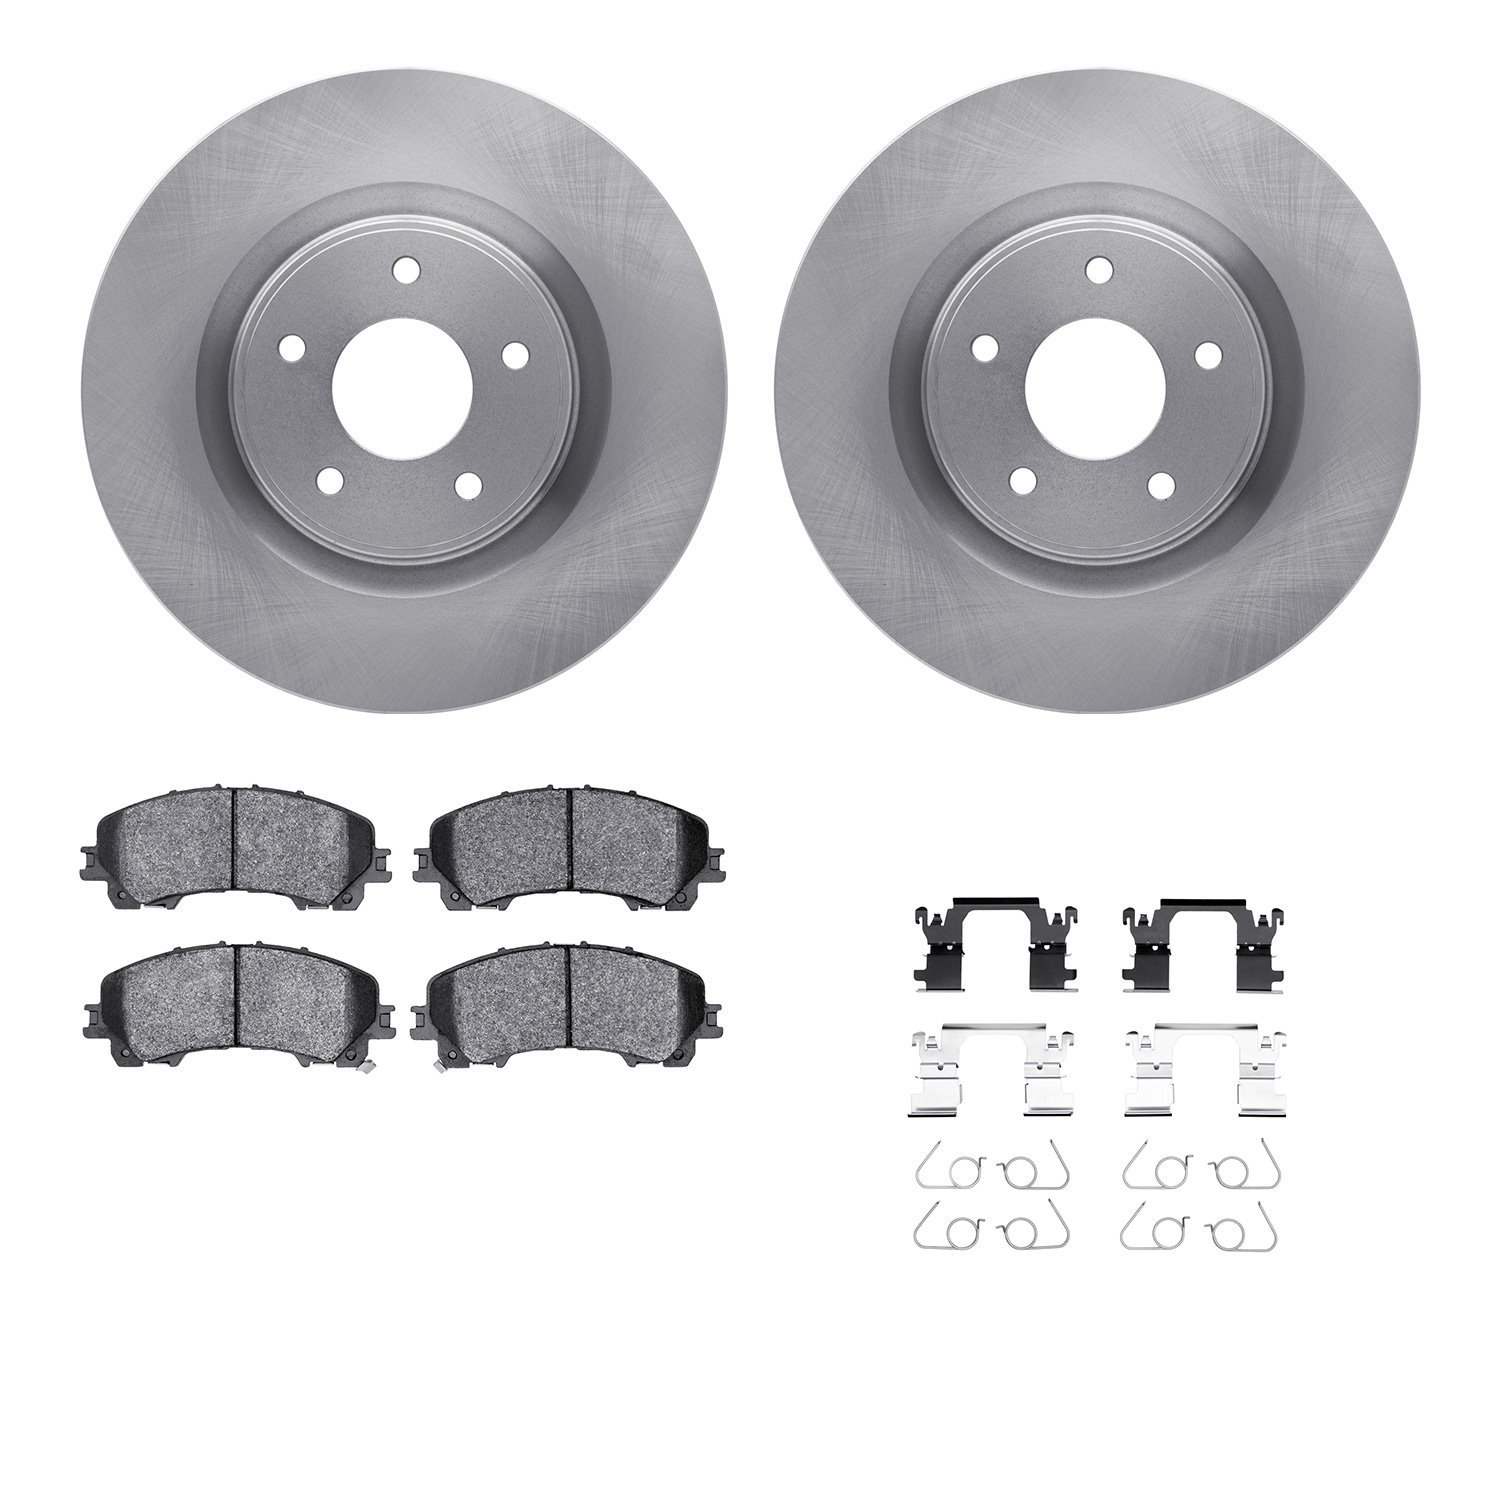 6312-67129 Brake Rotors with 3000-Series Ceramic Brake Pads Kit with Hardware, Fits Select Infiniti/Nissan, Position: Front